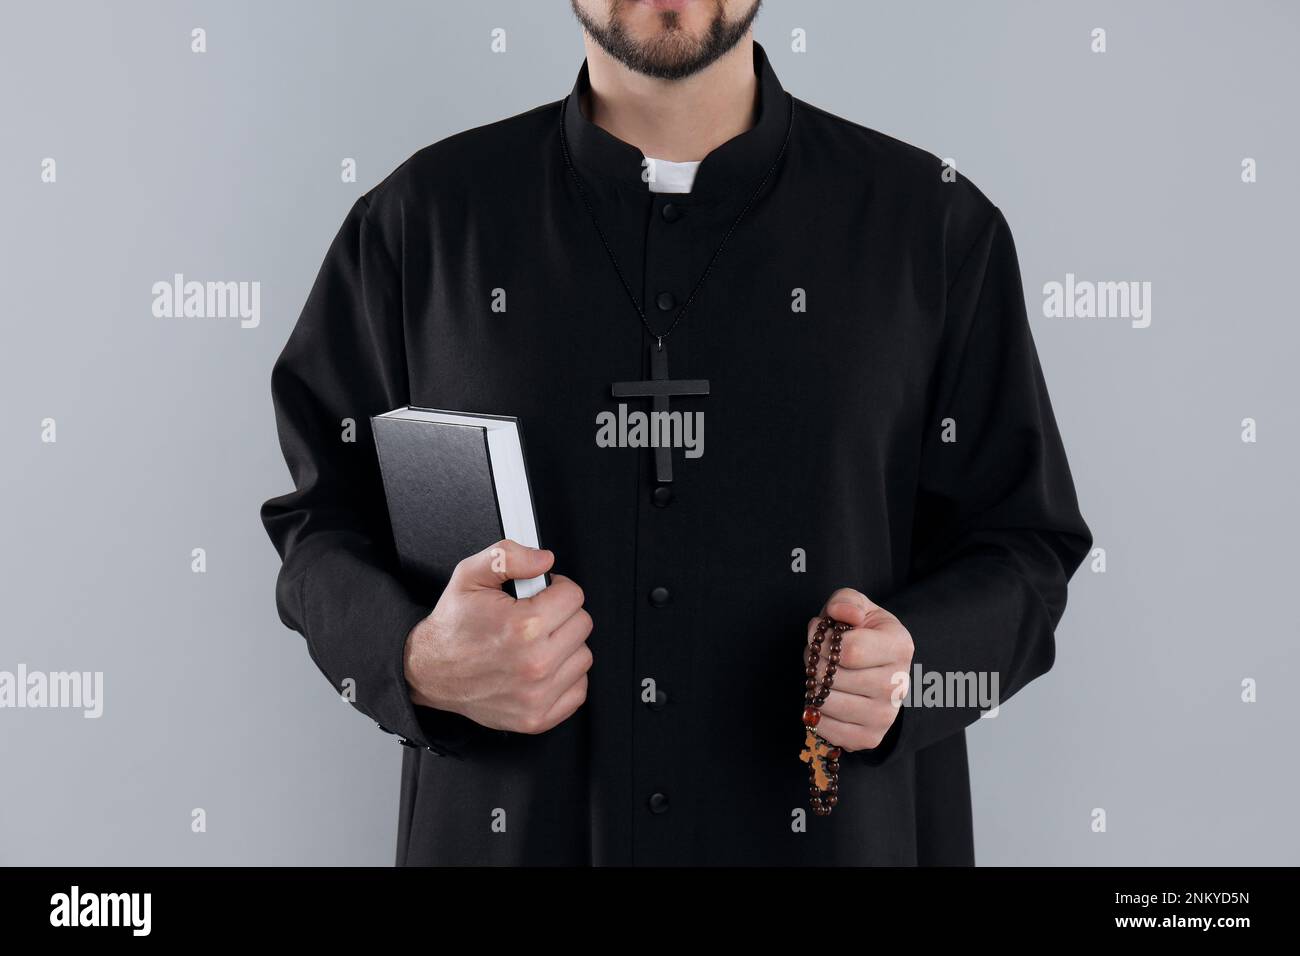 Priest with Bible and rosary beads on grey background, closeup Stock Photo